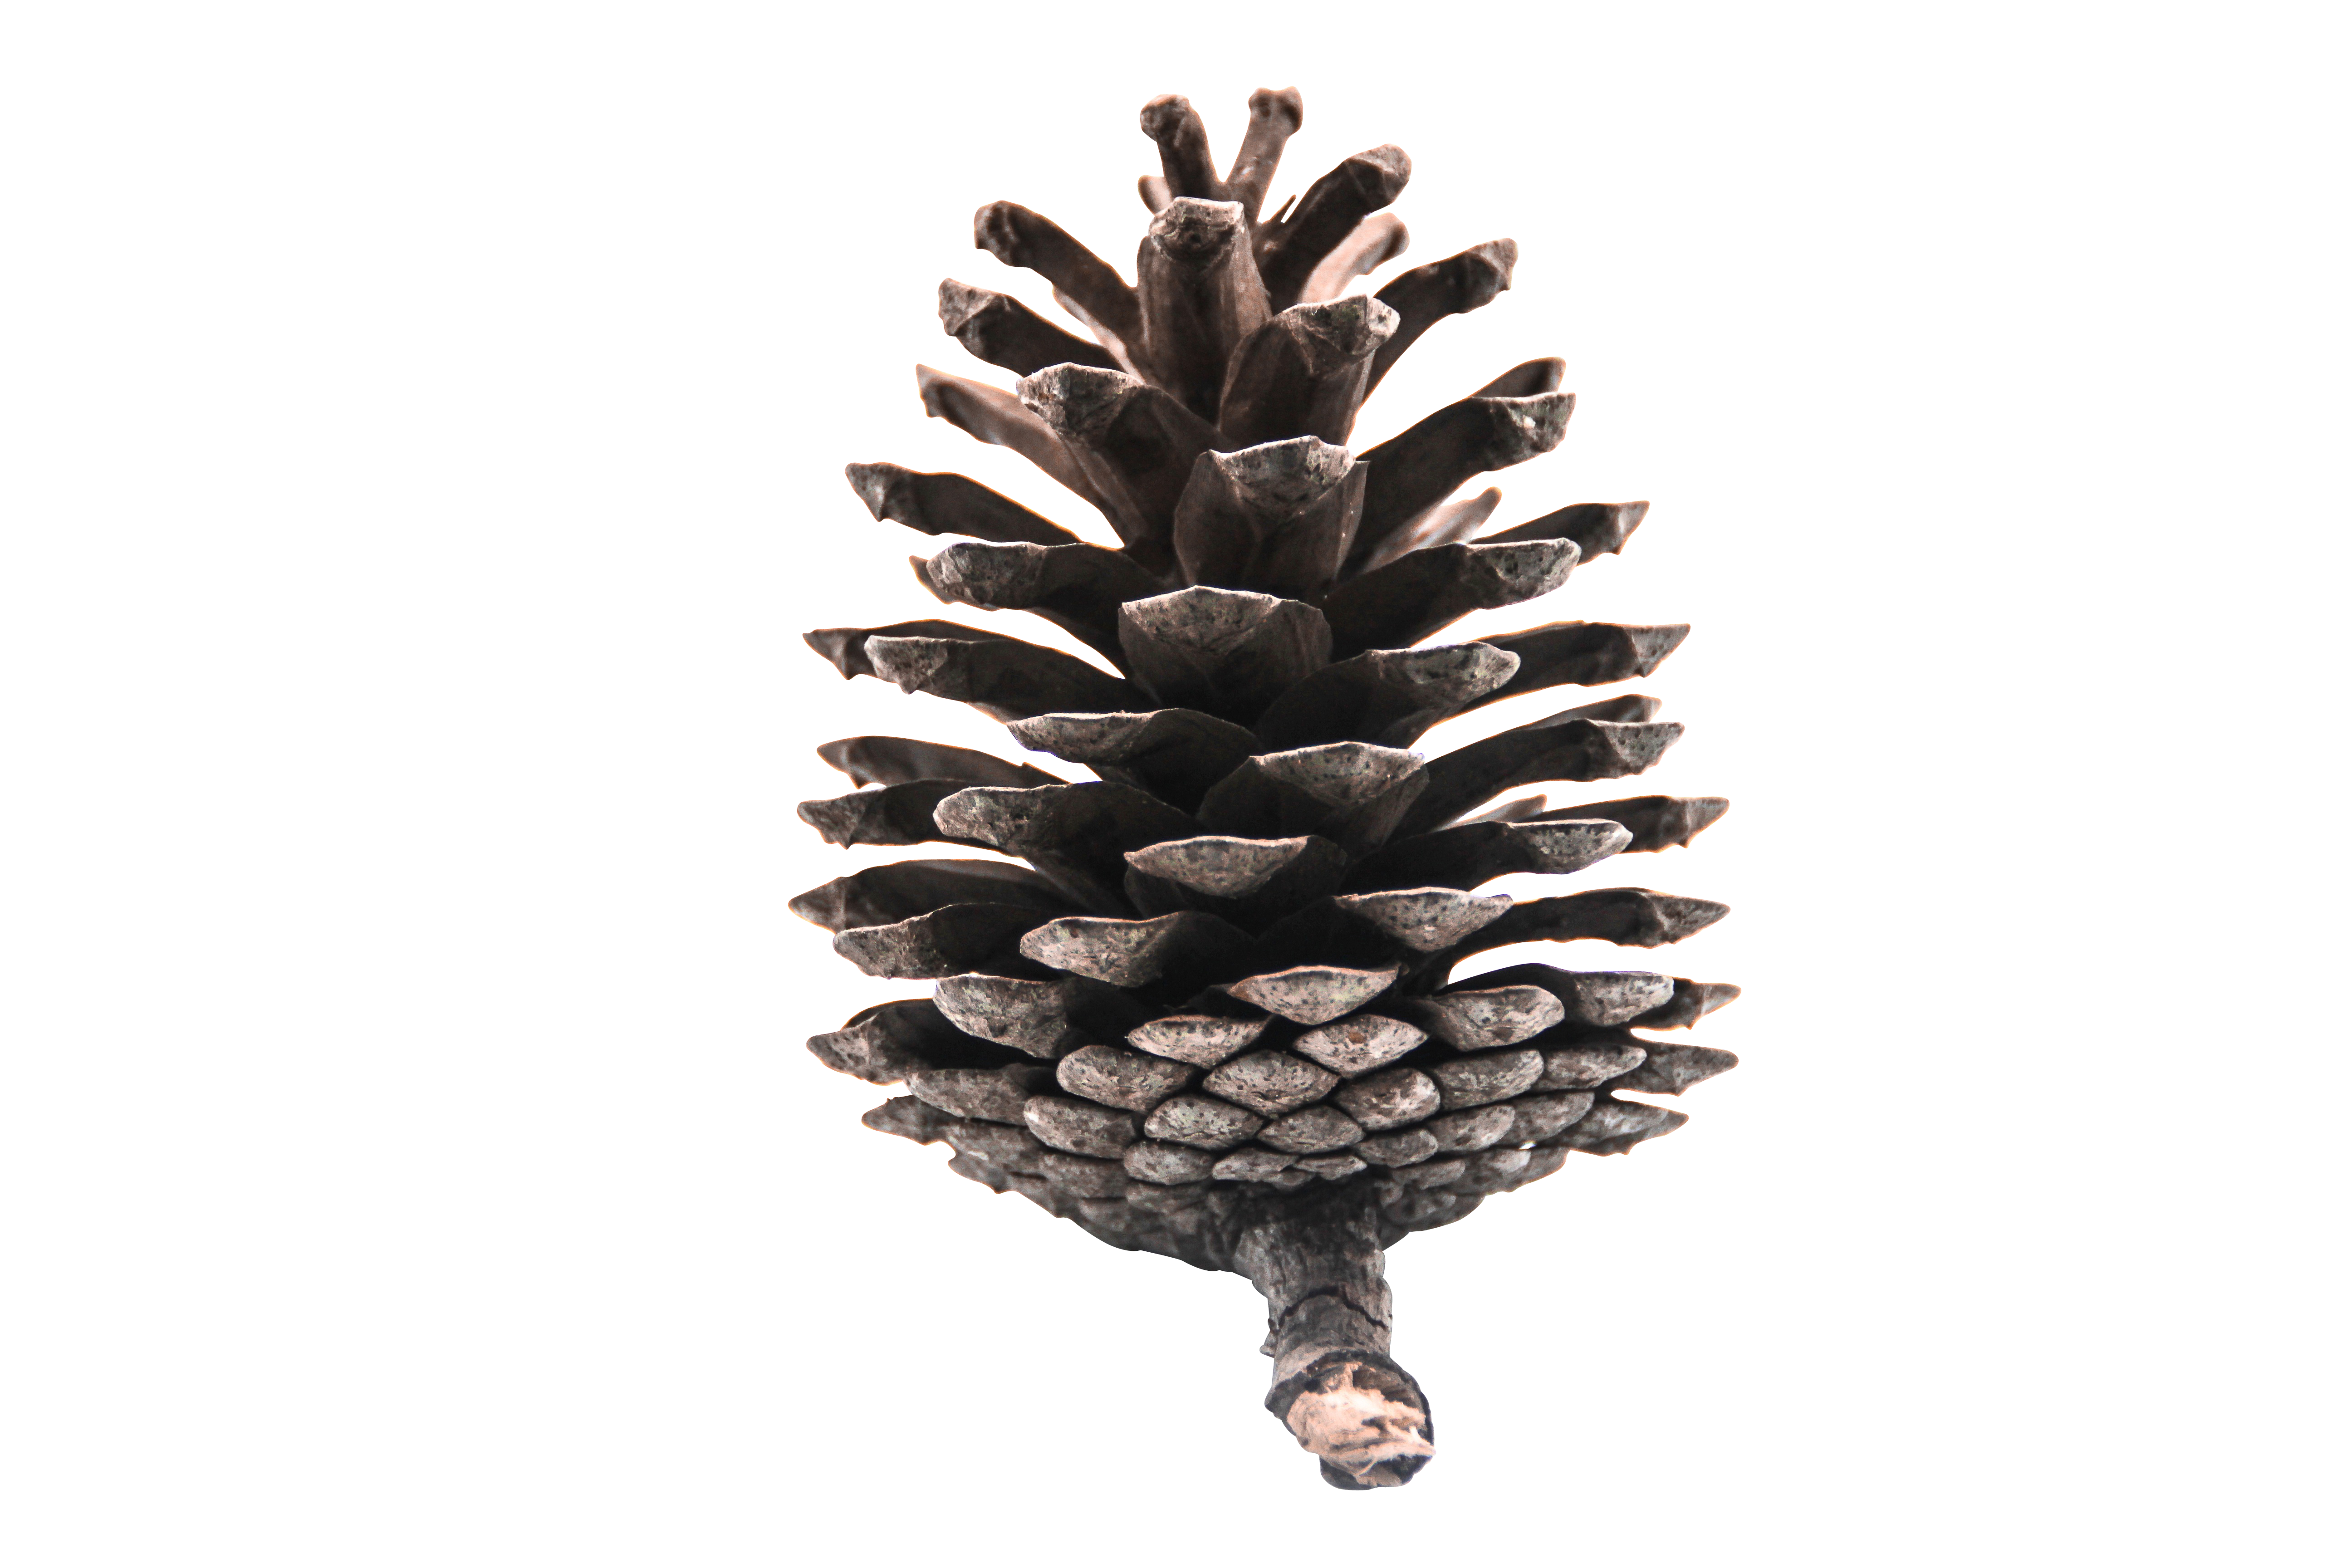 A Pine Cone On A Black Background